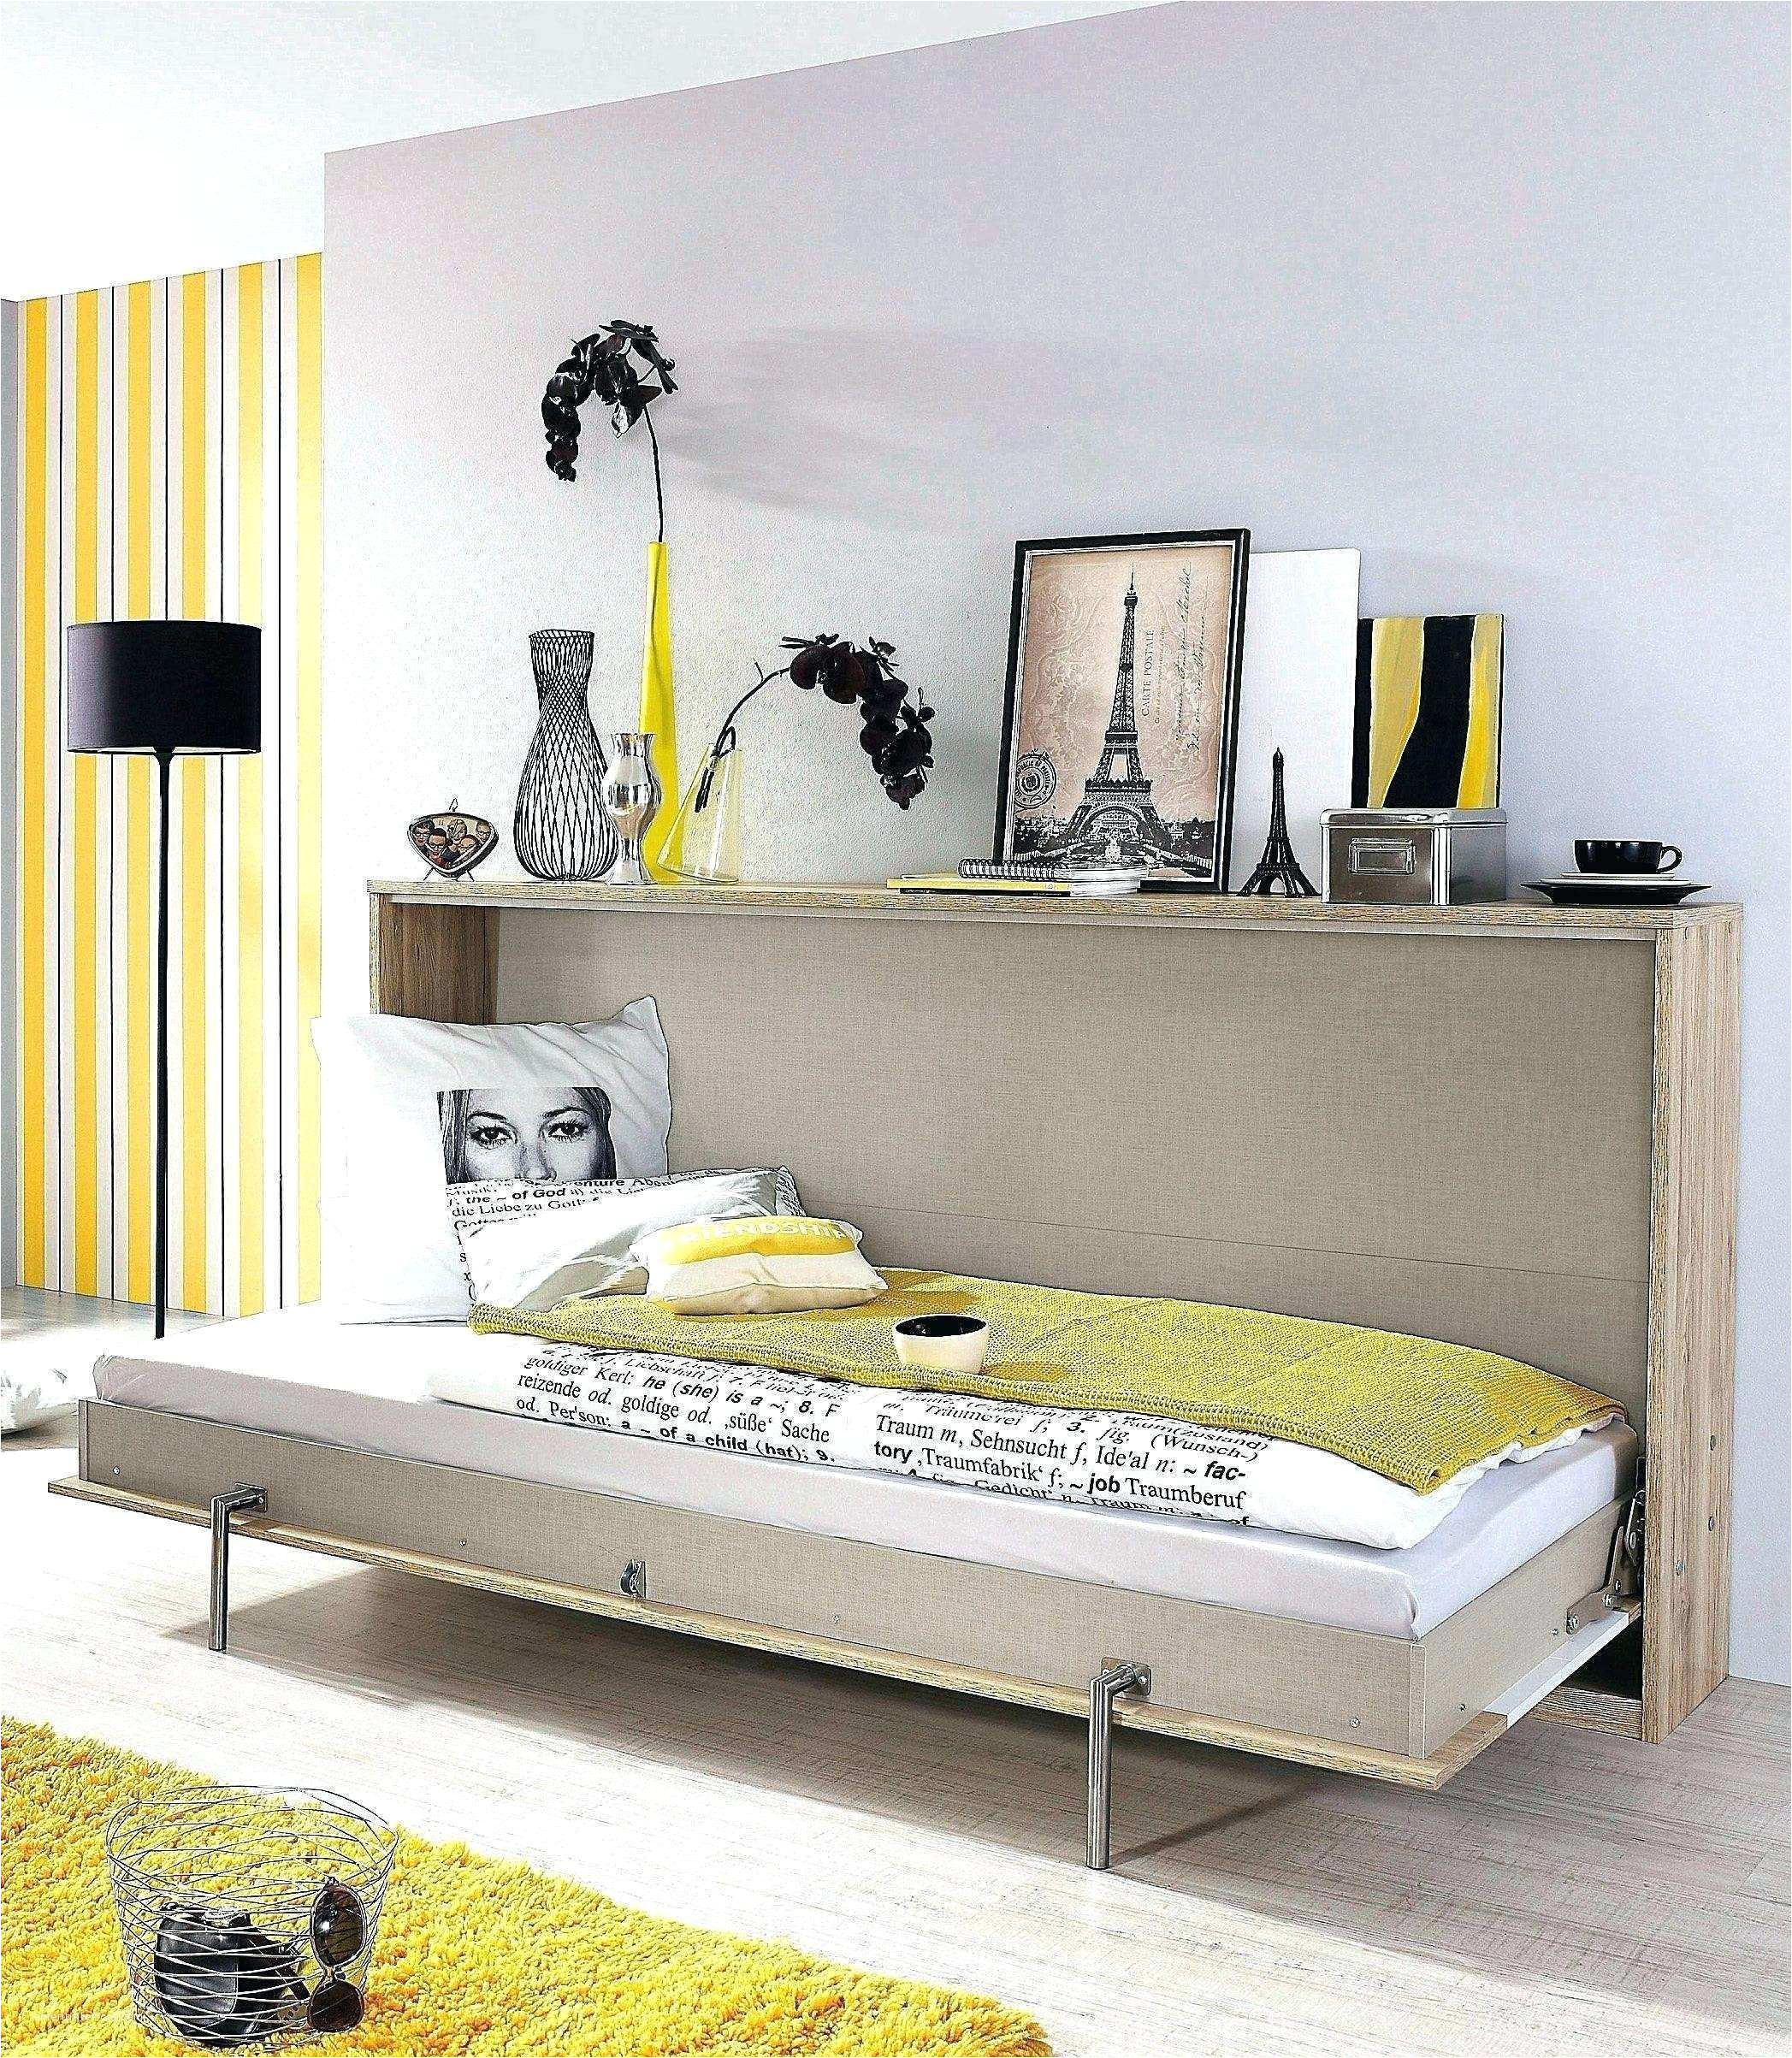 dishy ikea twin bed inspired 50 frisch bett ikea 200x200 images low cost ikea twin bed and ikea hemnes daybed with 3 drawers